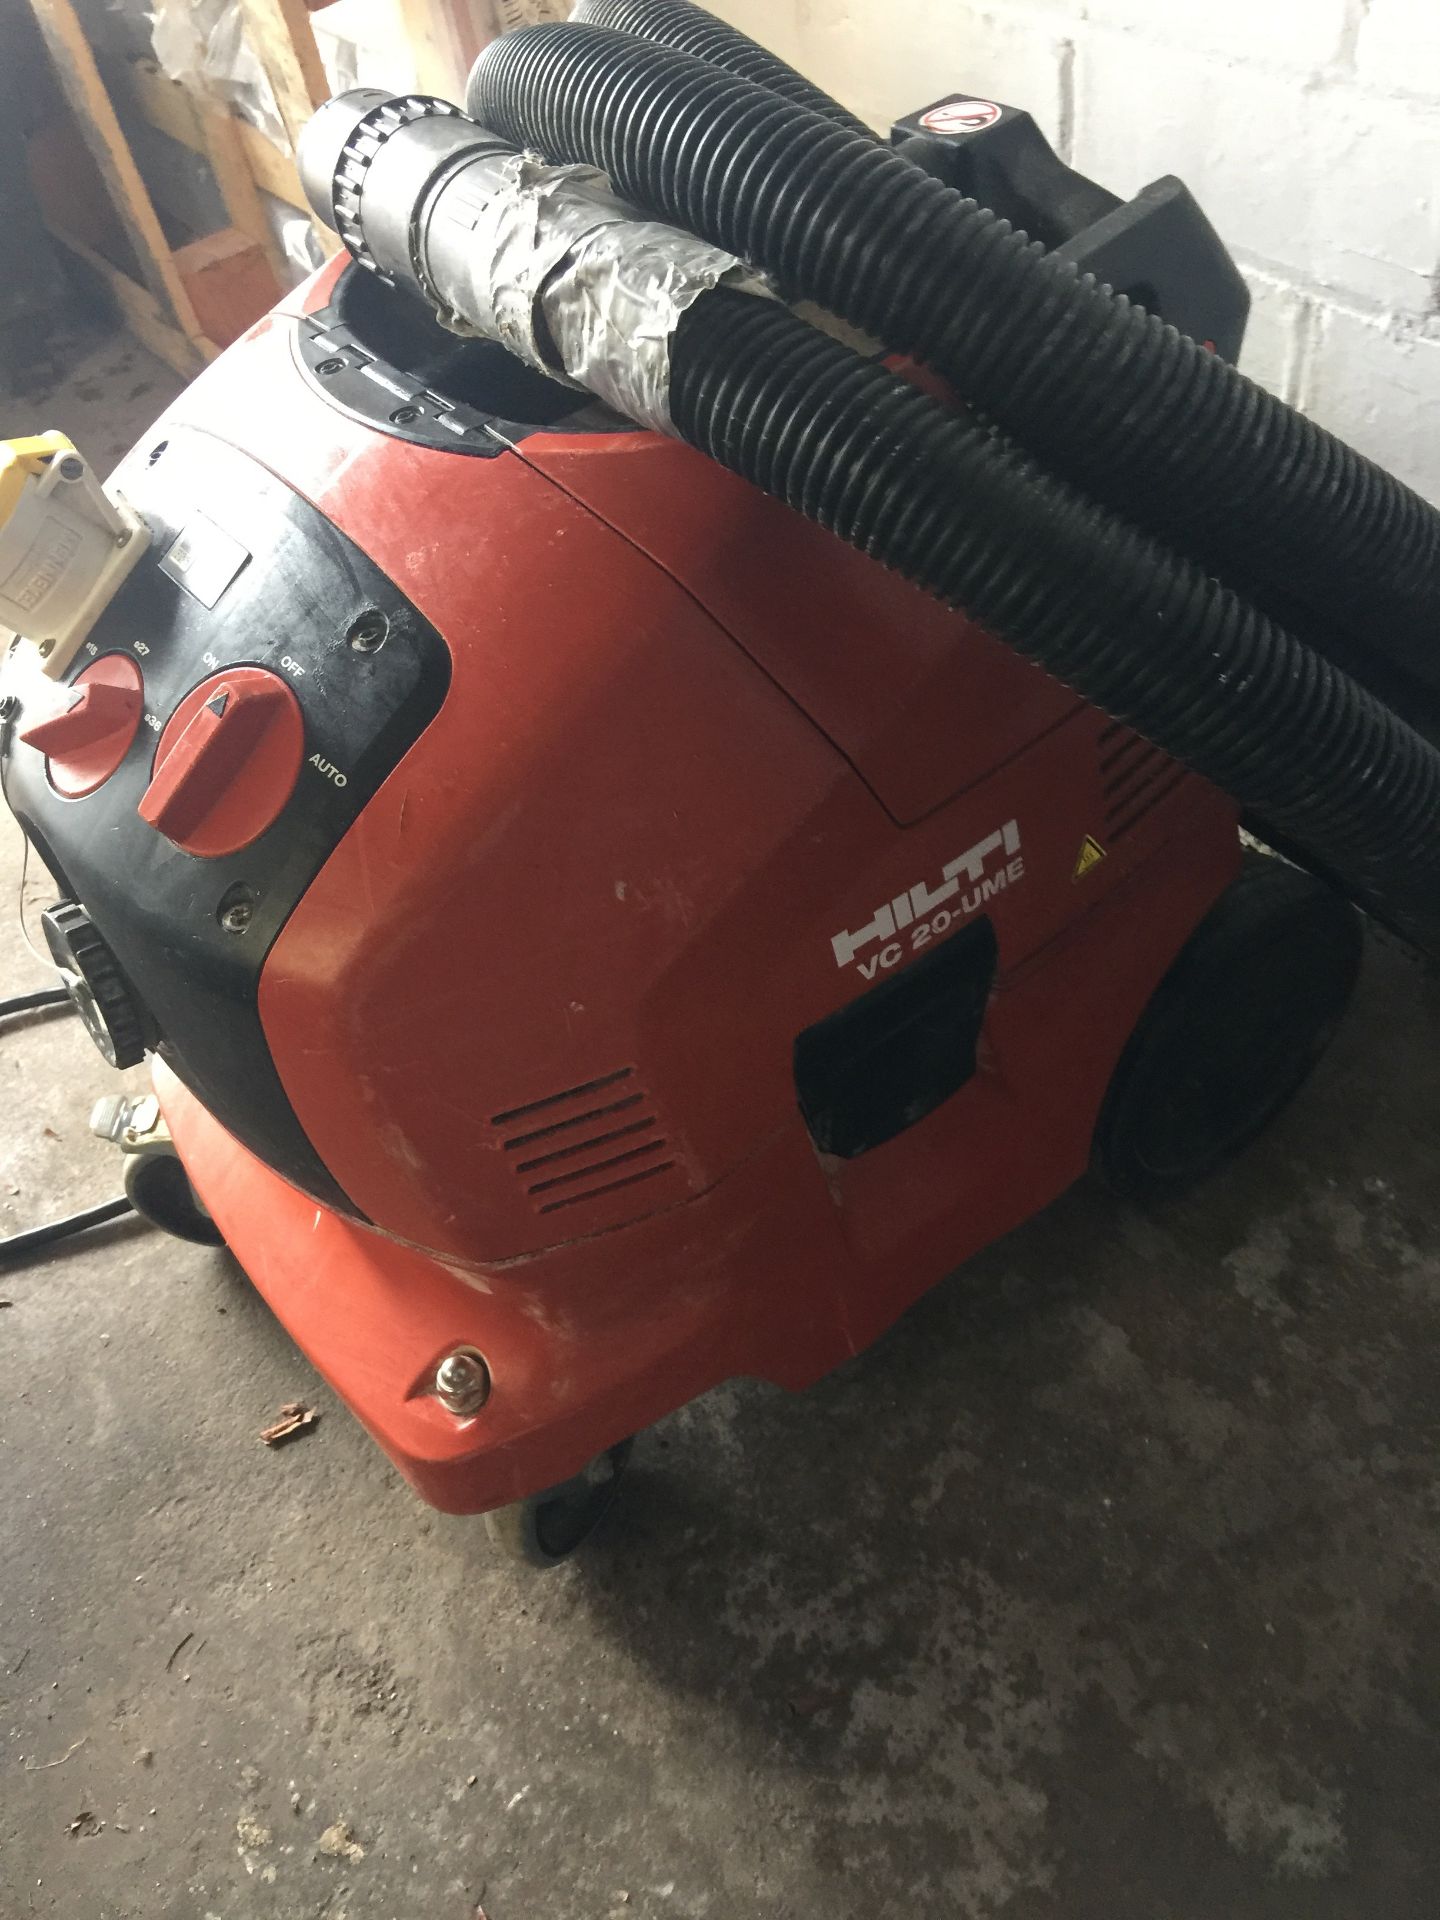 Hilti model VC20-UME extraction hoover - Image 3 of 3